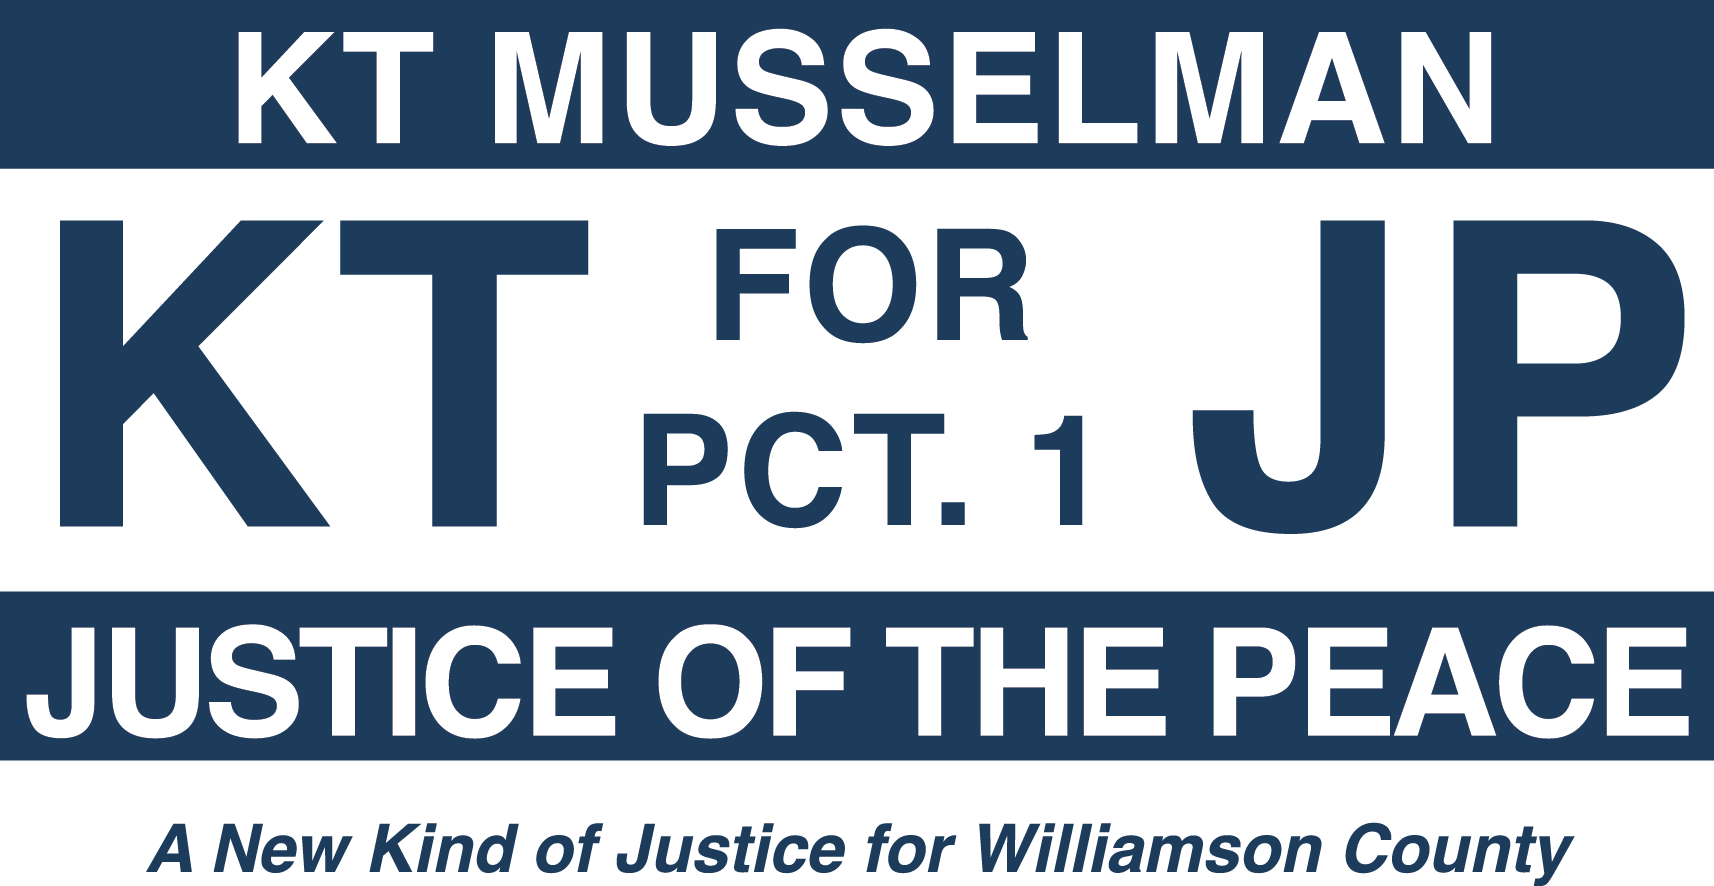 KT Musselman for Justice of the Peace